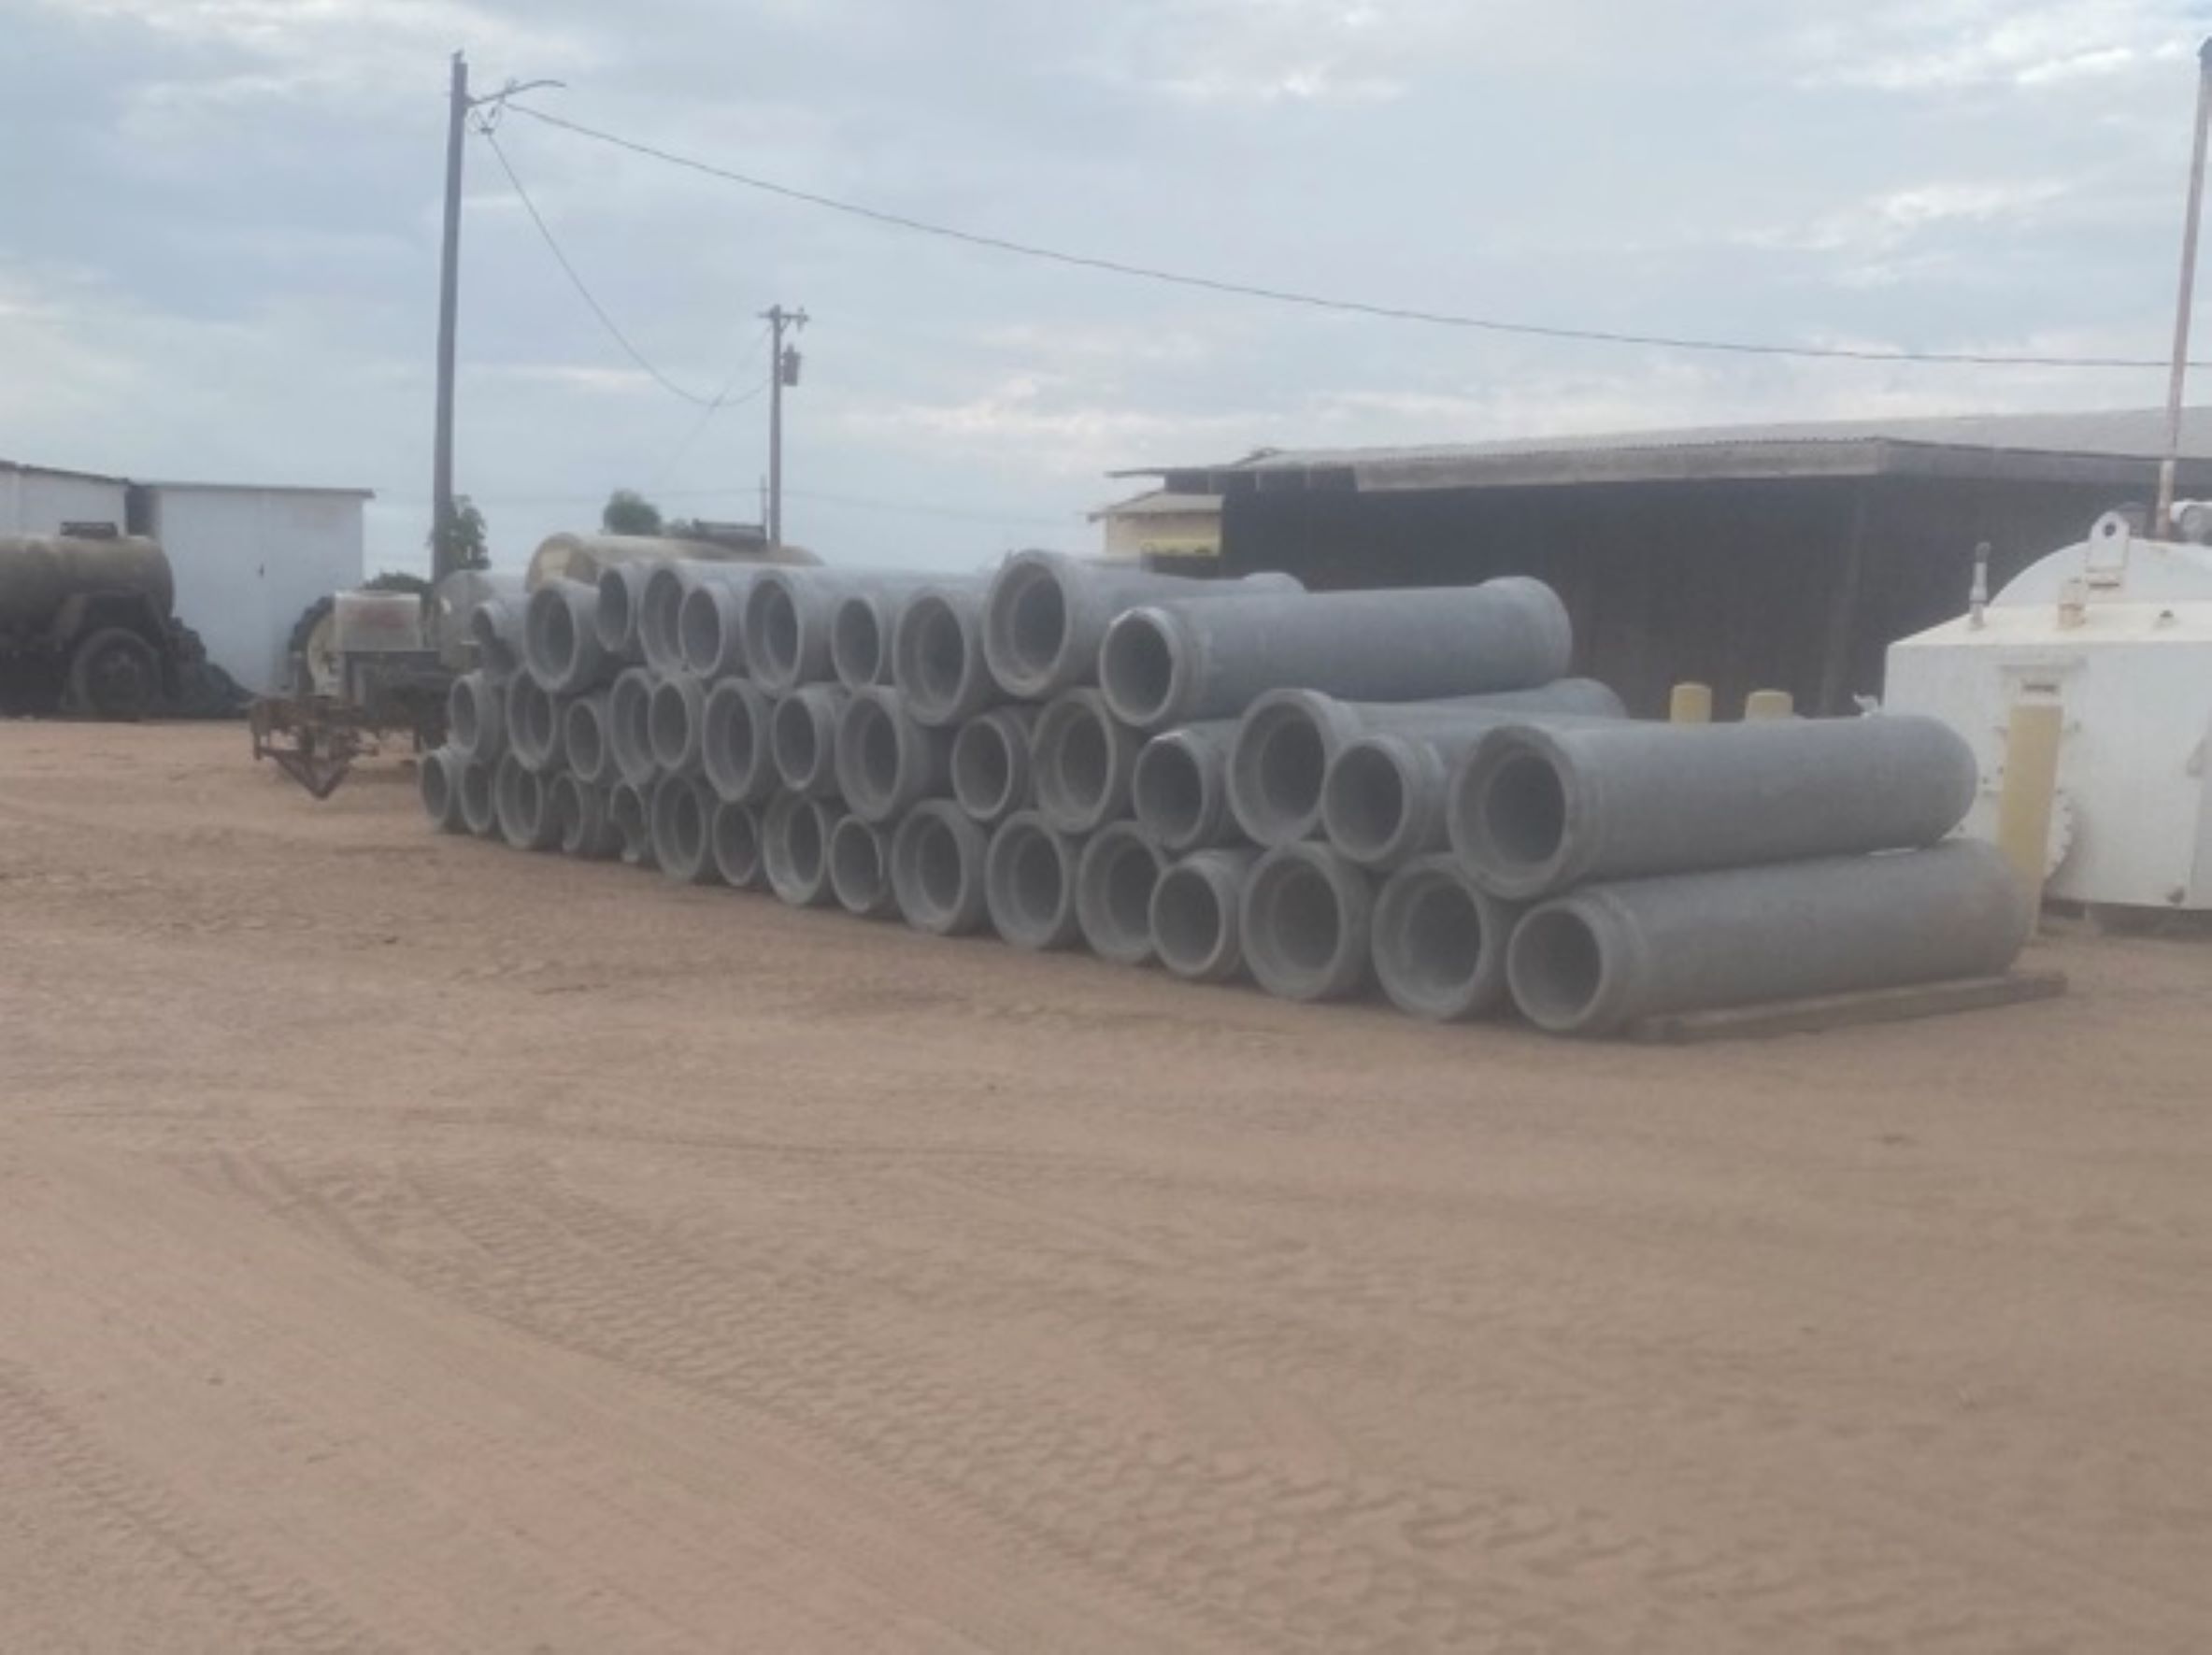 cement pipes